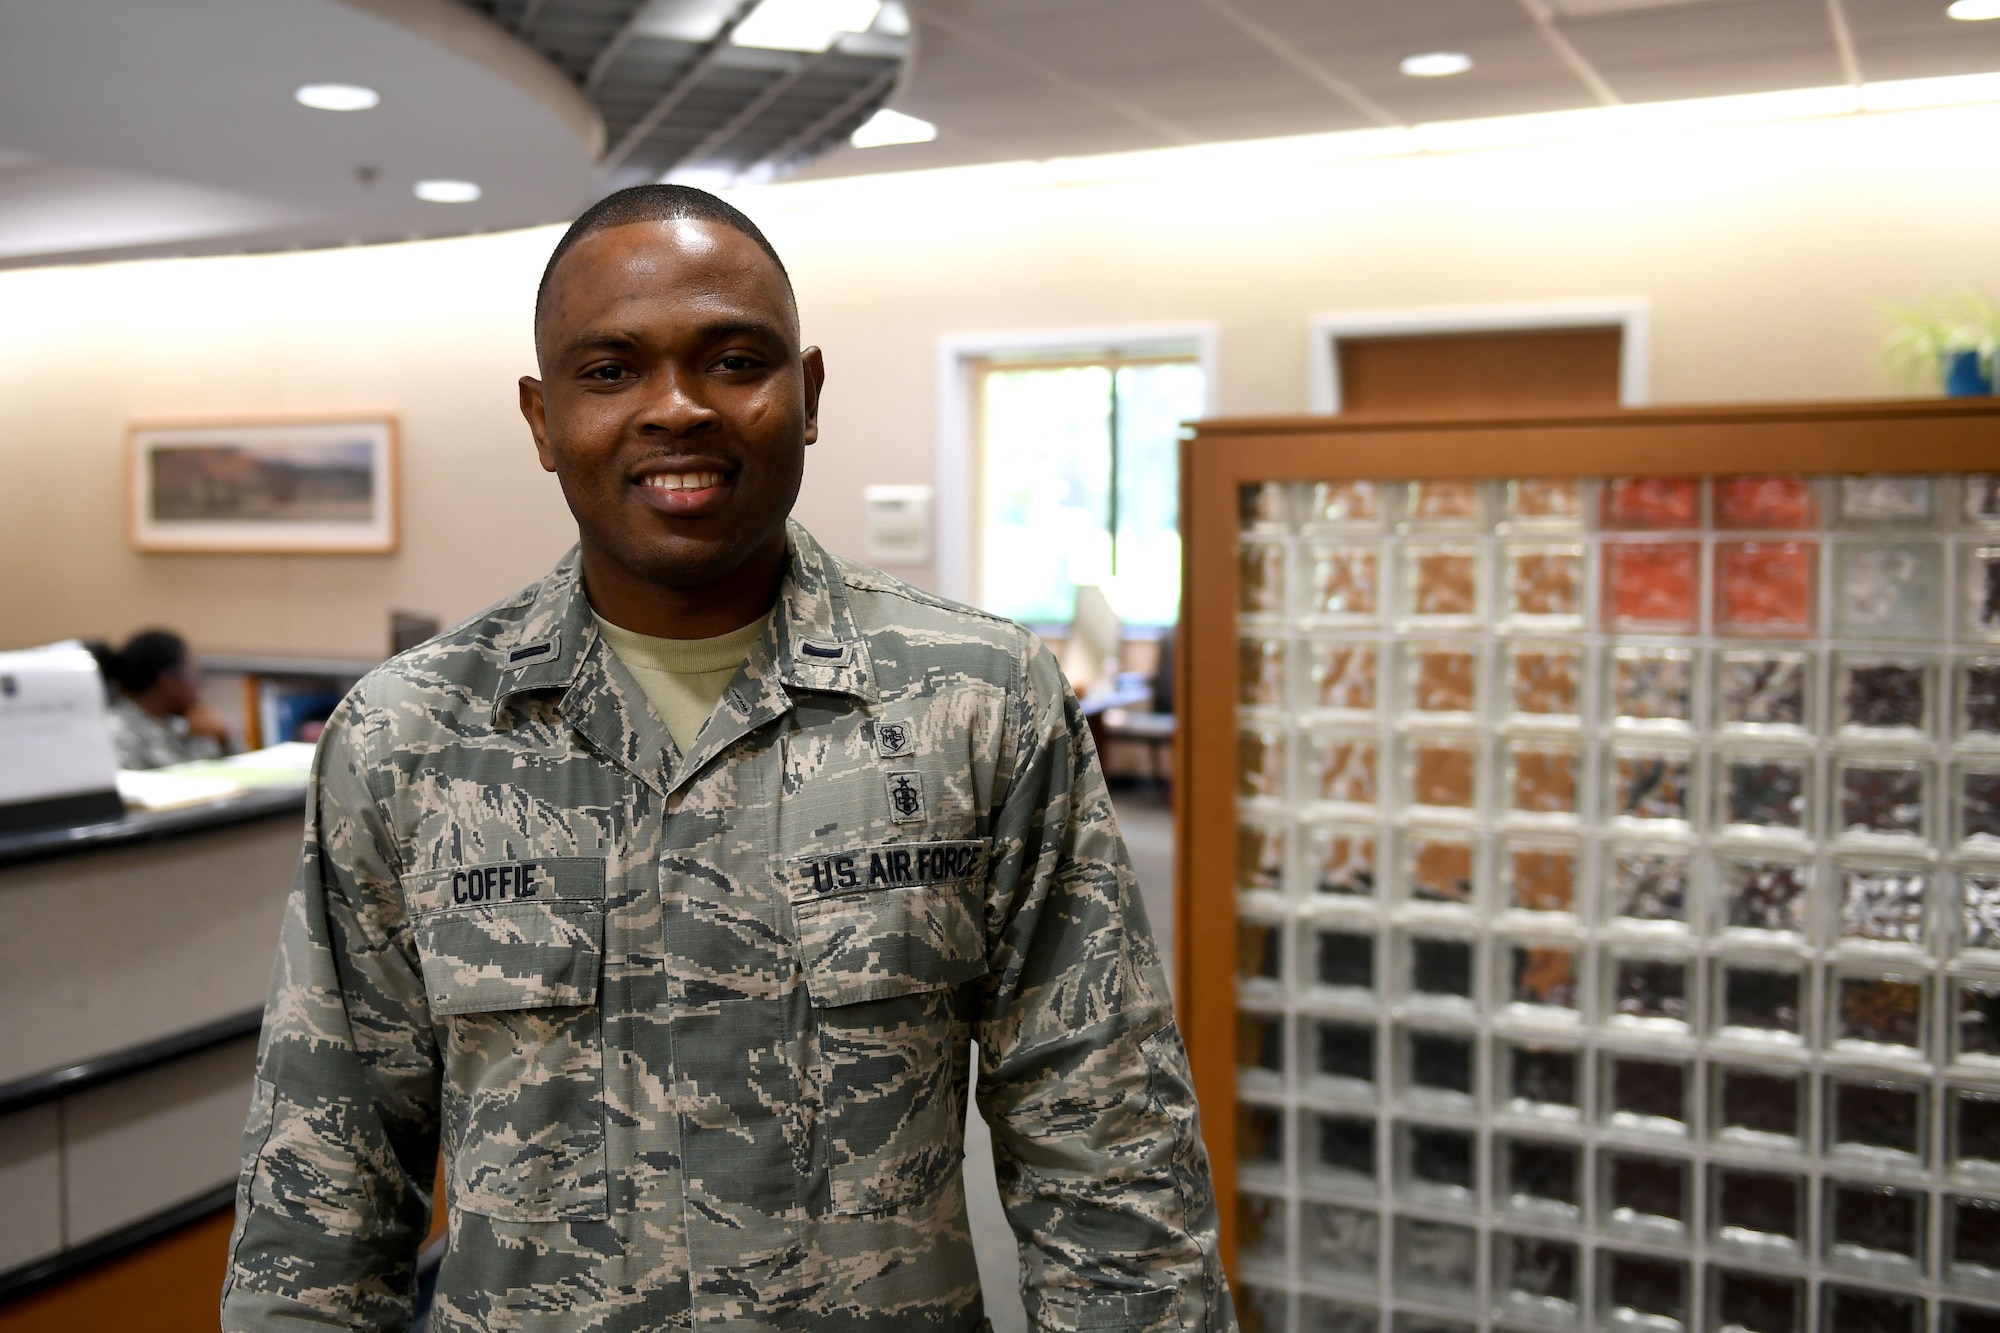 A man in the Airman Battle Uniform smiles at the camera.